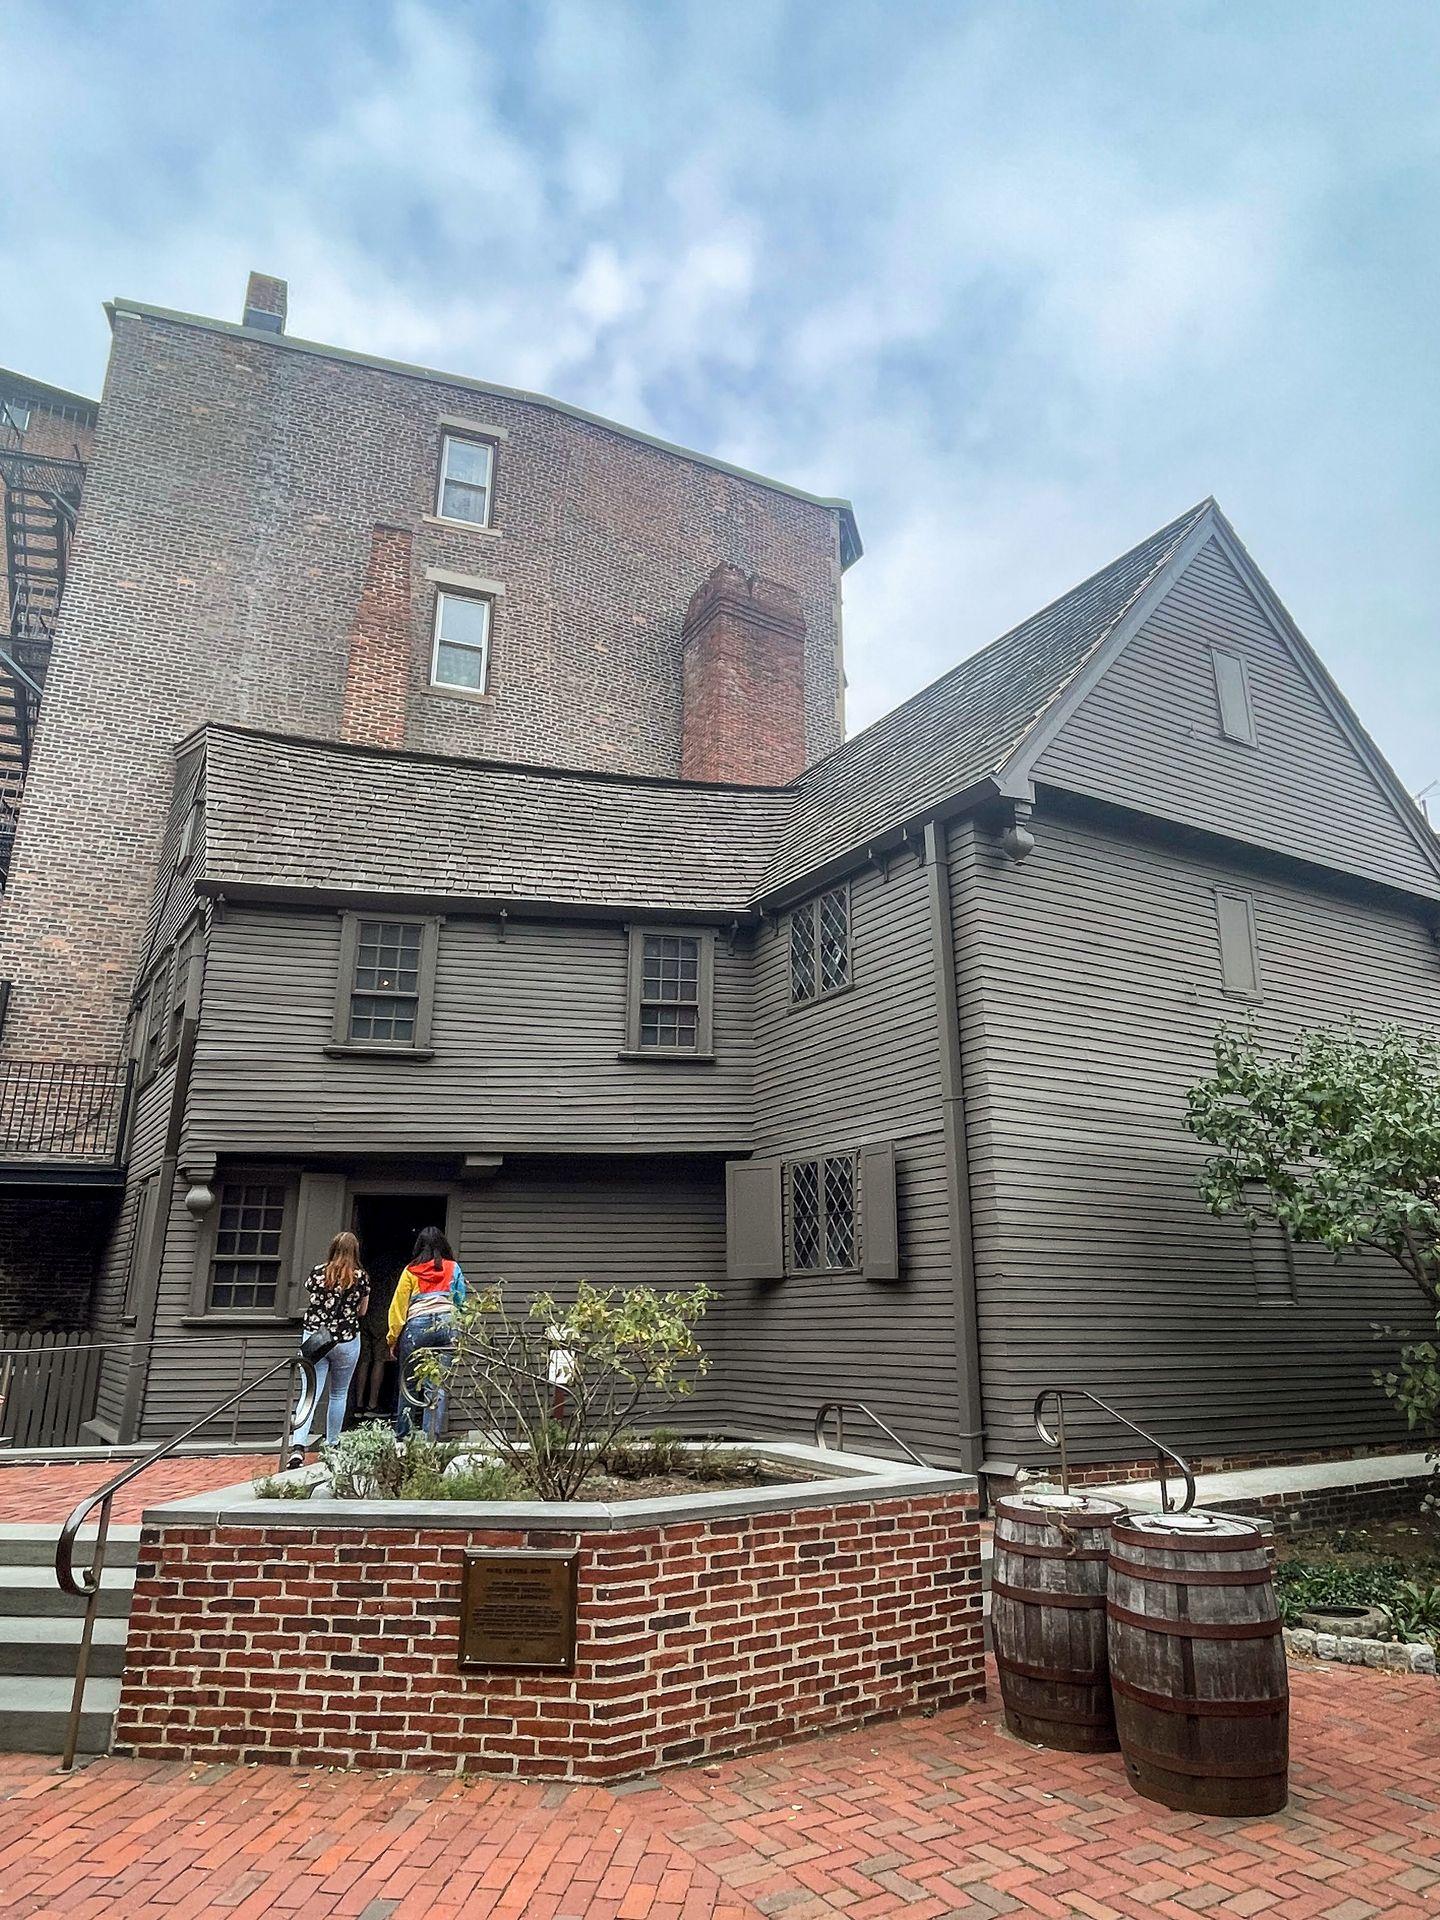 An outside view of the Paul Revere House. The building is gray.